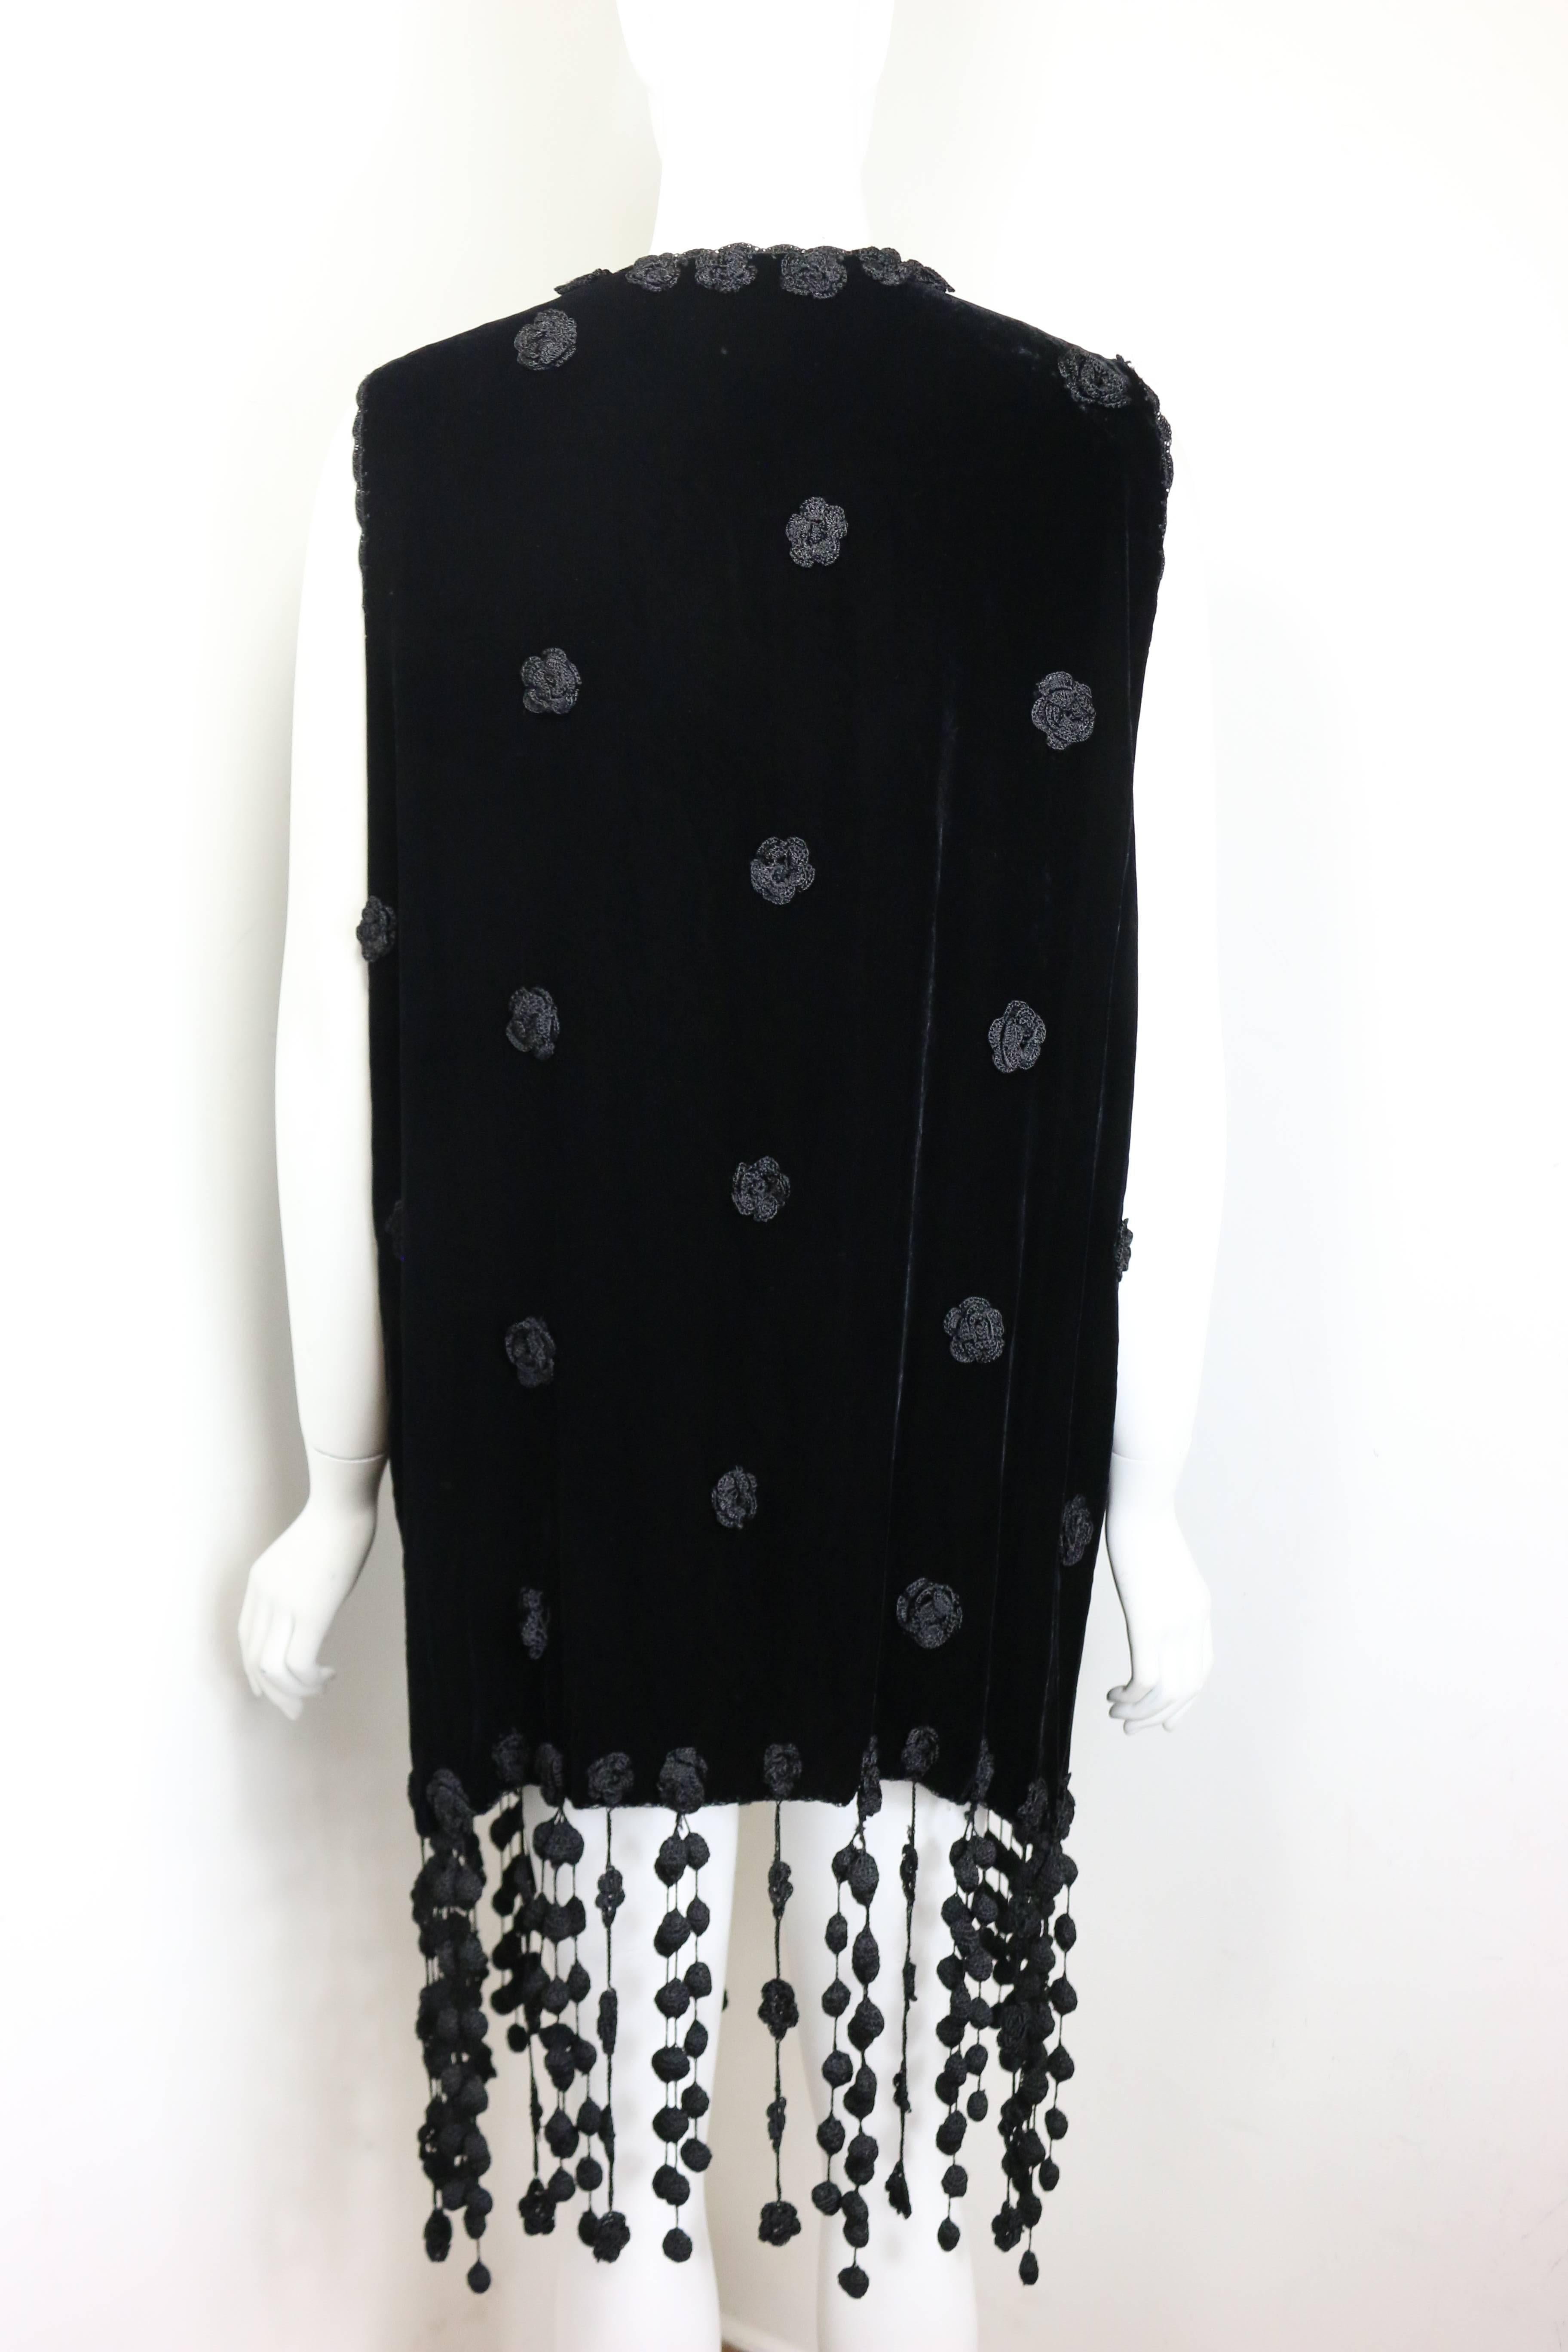 - Vintage 80s Cheap and Chic by Moschino black velvet and knitted flower embroidered long vest. Featuring a silk knitted lining and knitted fringes. A very creative and an interesting Moschino vest!

- Made in Italy. 

- Size 40 Italy. 

- Shoulder: